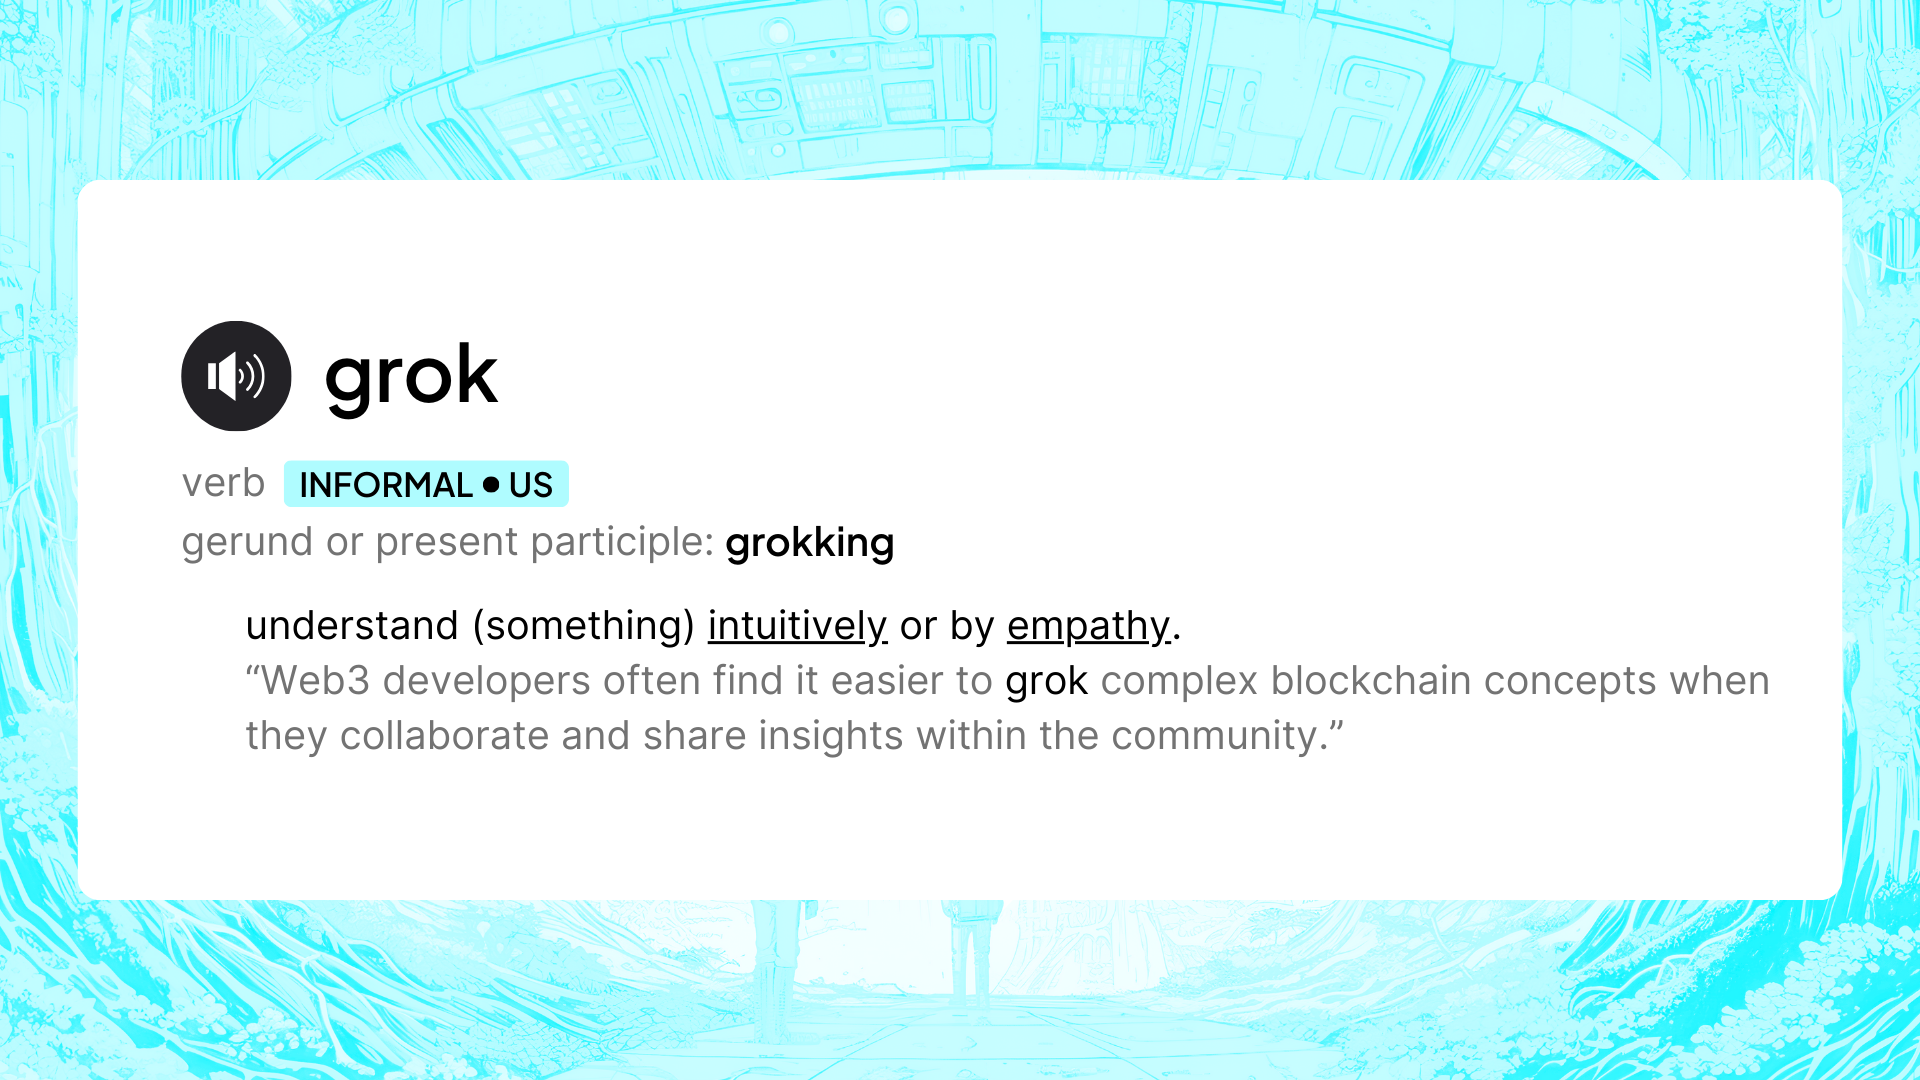 Dictionary Definition of Grok